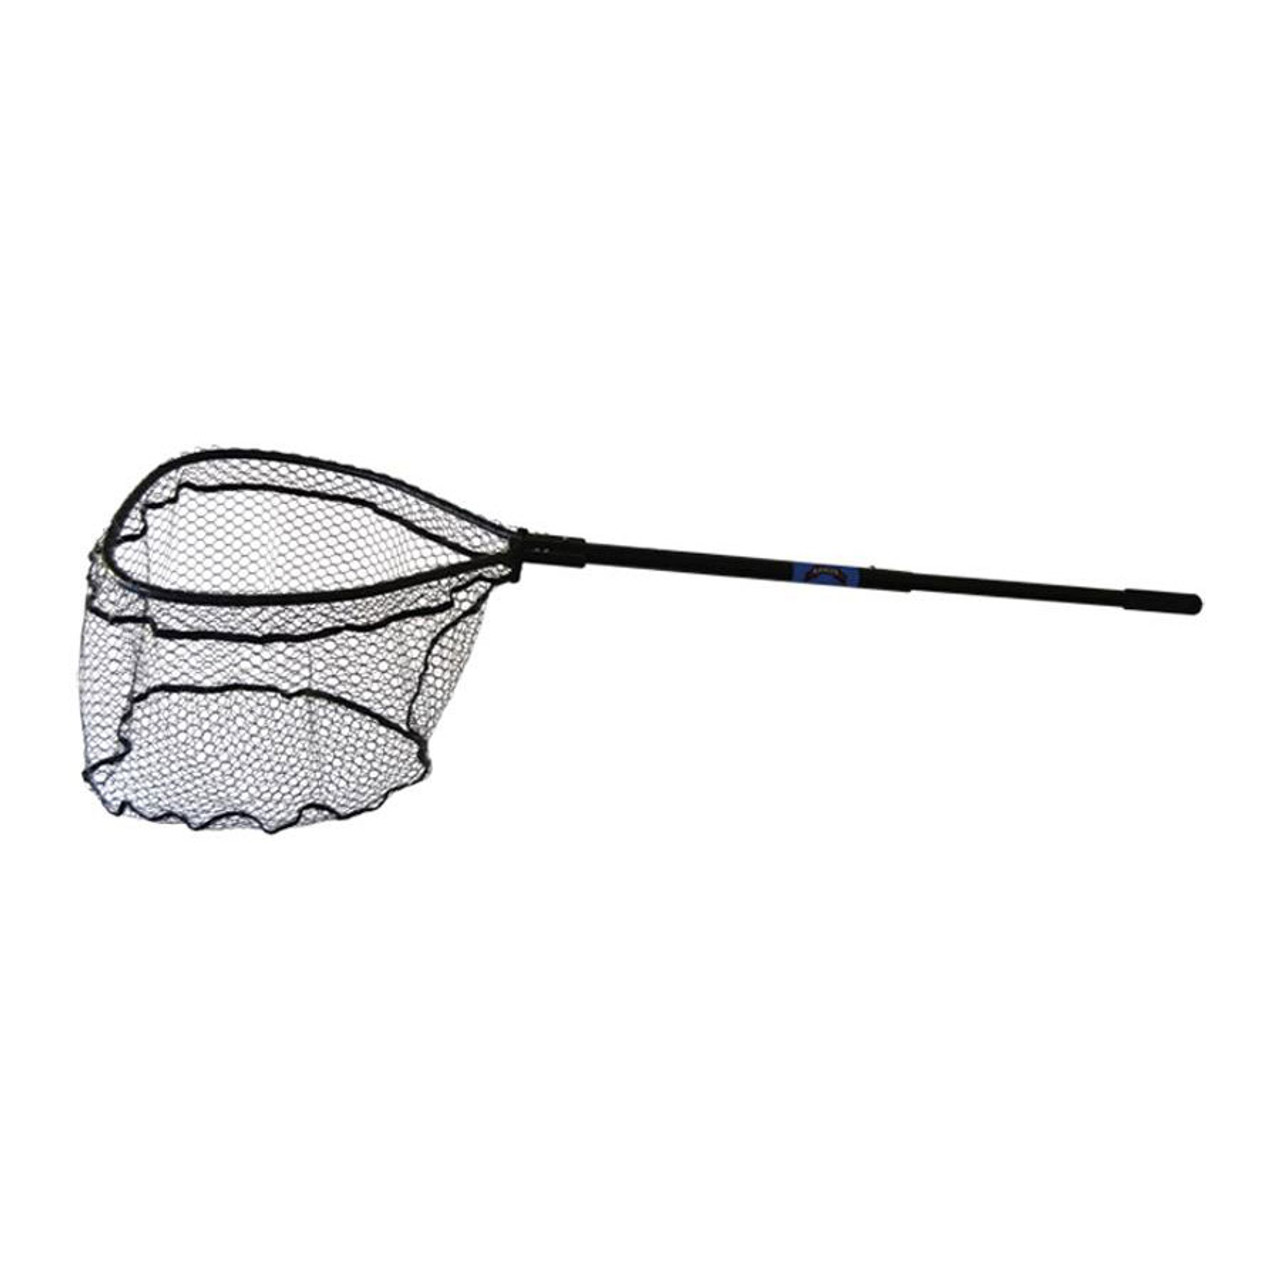 Buy Ranger Nets Knotless Flat Bottom Rubber Coated Net with Octagon Handle,  28x30-Inch, Black Online at Low Prices in India 